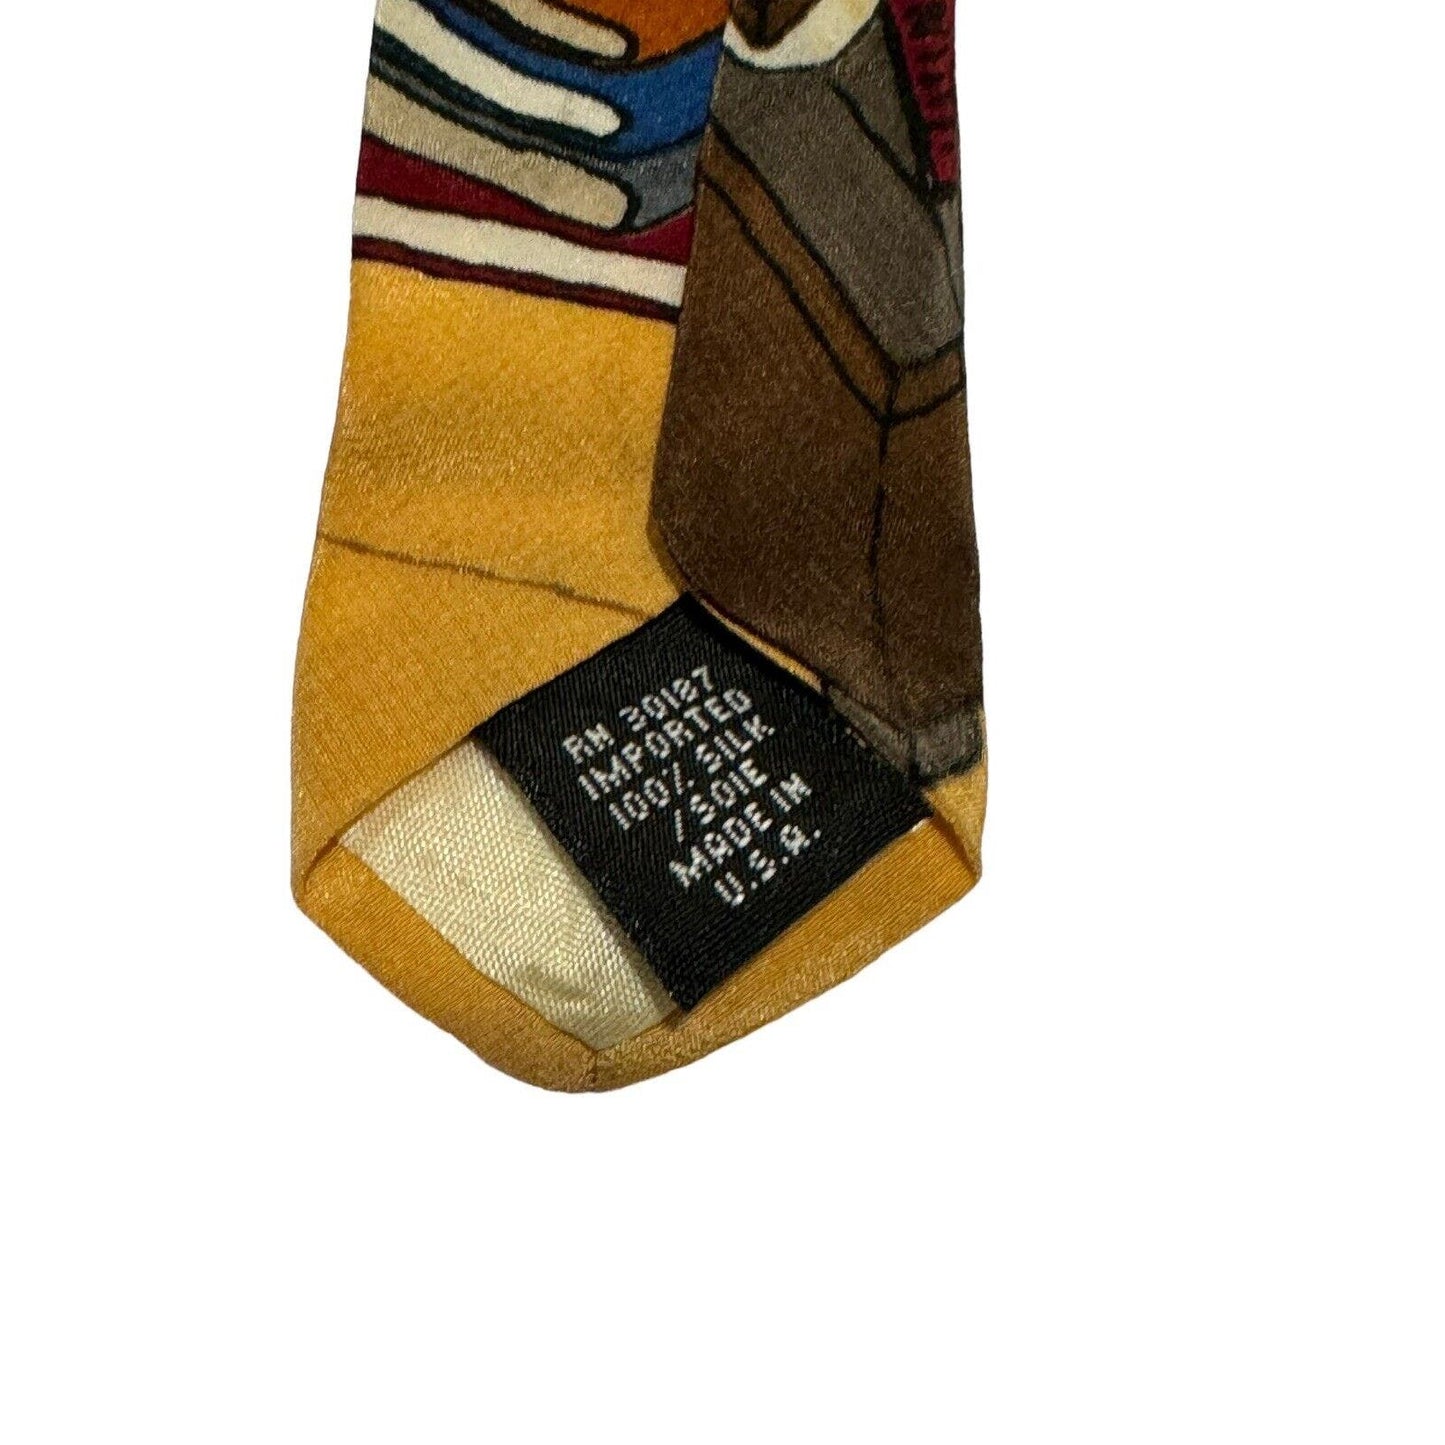 Peanuts Good Friend’s And Good Conversation Snoopy Cafe Coffee House Necktie